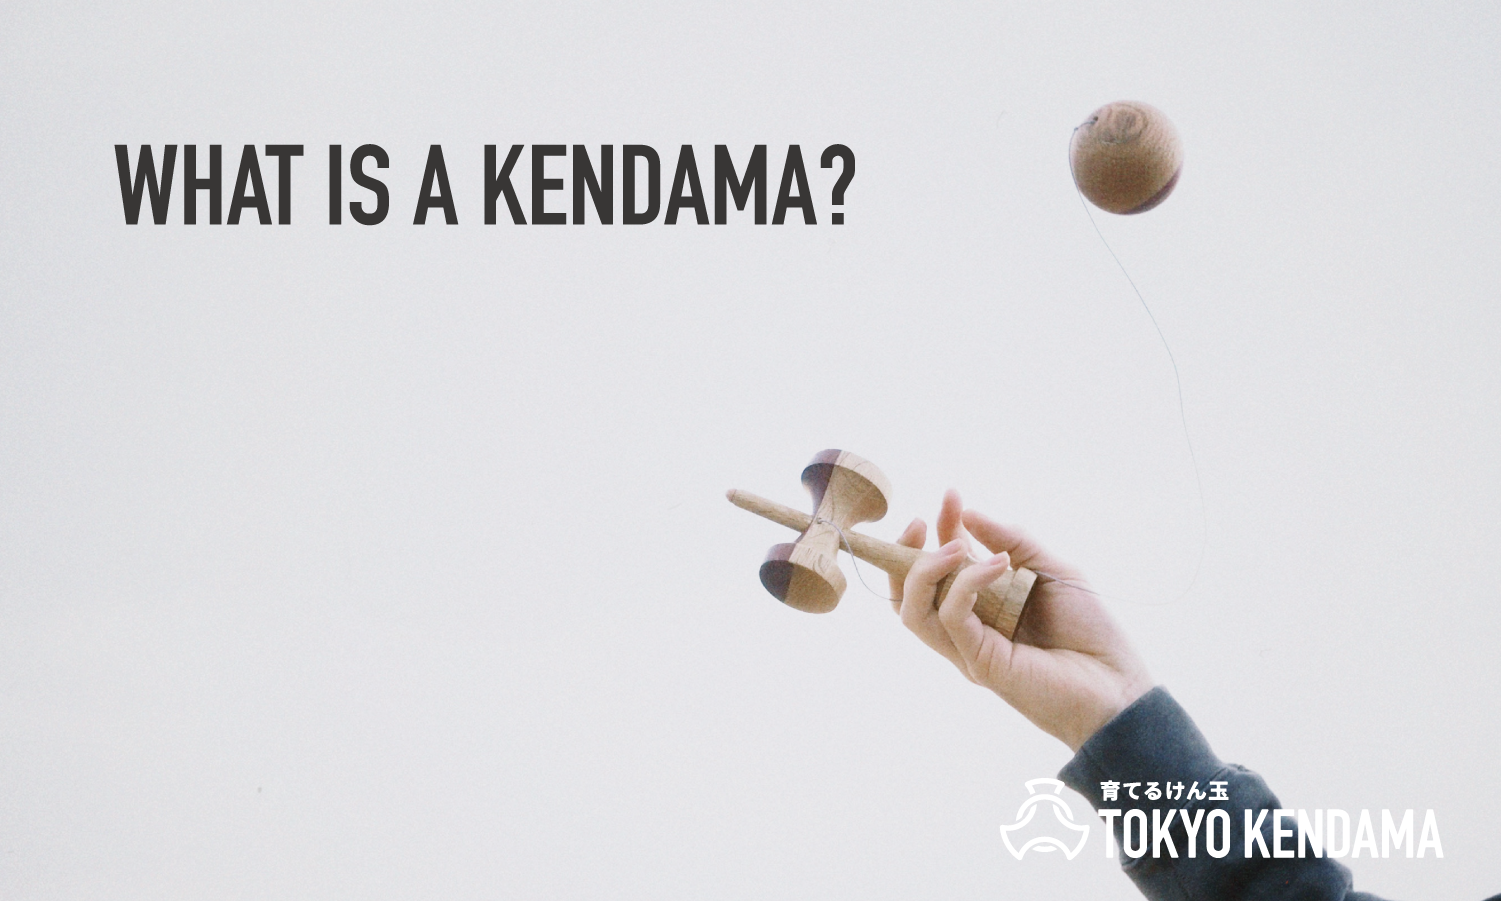 WHAT IS A KENDAMA?